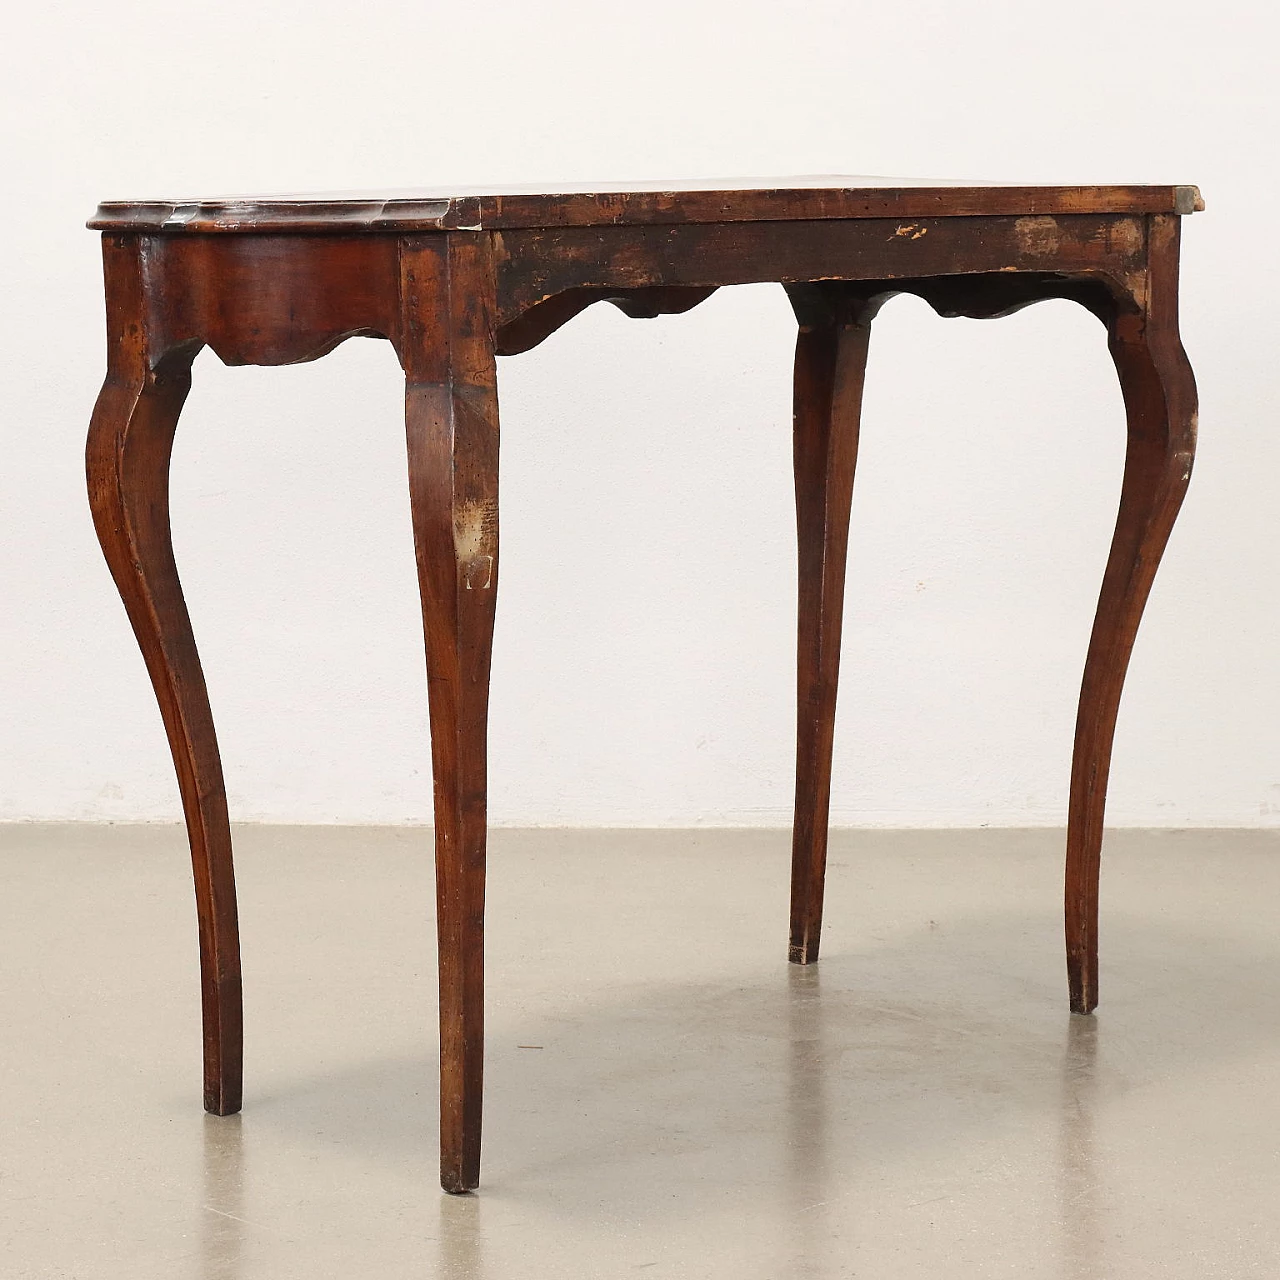 Console in cherry wood with walnut top and wavy legs, 18th century 7